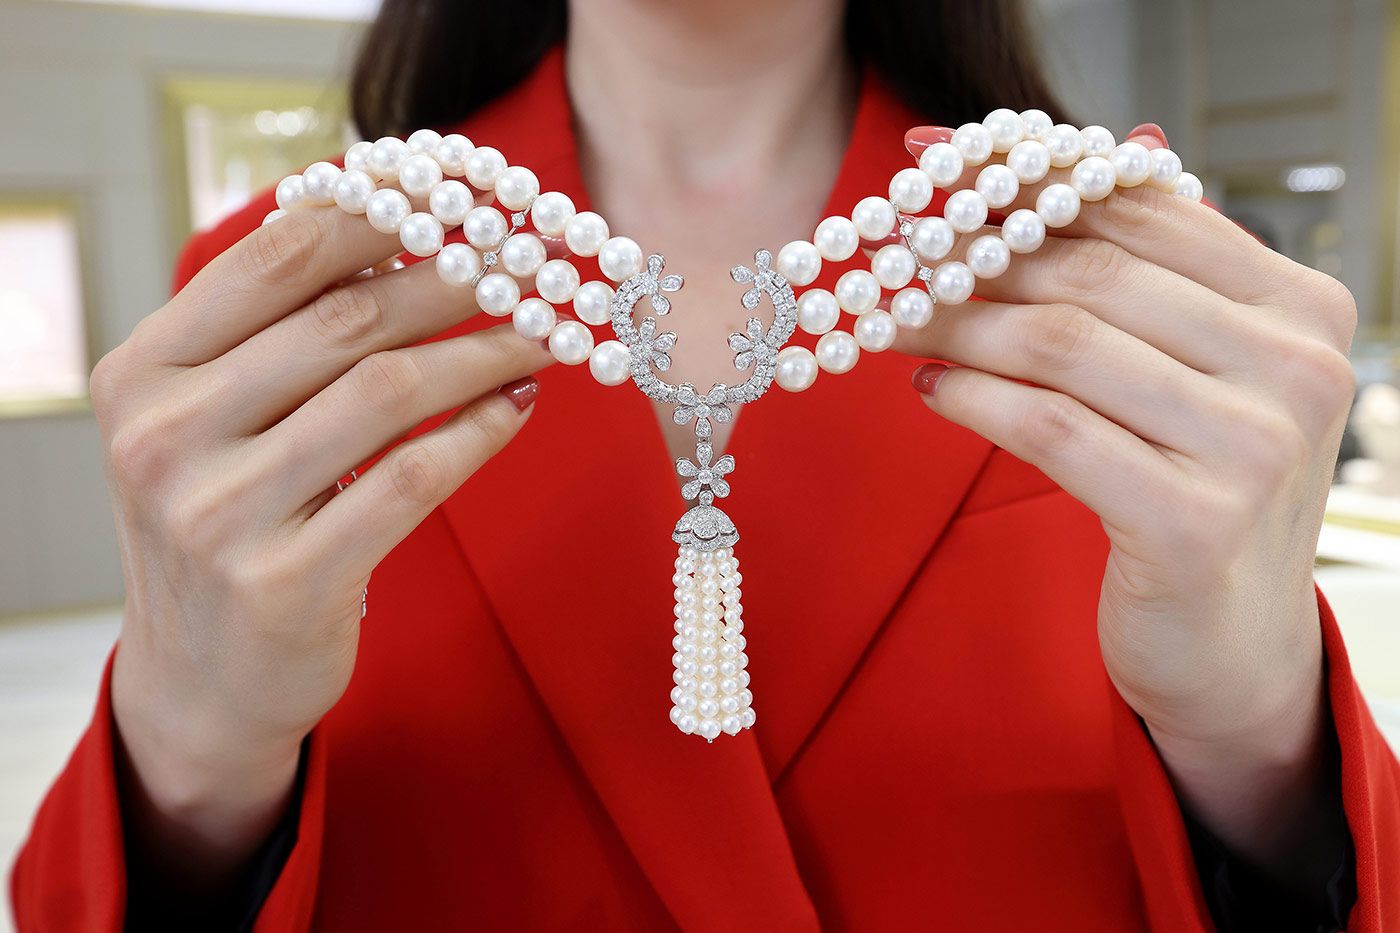 Katerina Perez showcases a Yoko London high jewellery necklace with pearls and diamonds